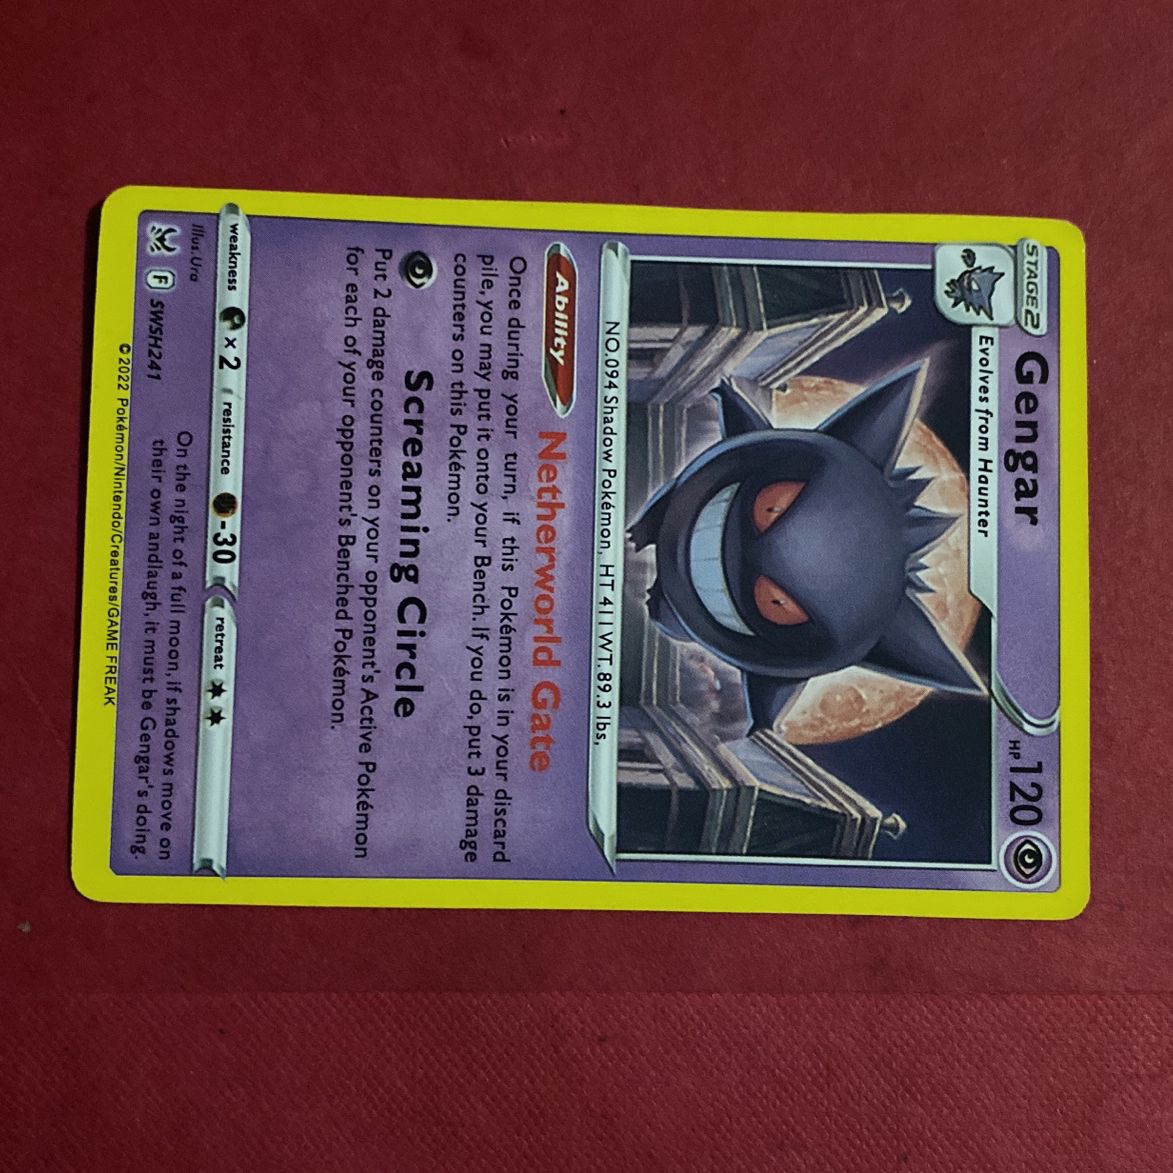 Gengar EX's full art, mega, and shiny m Gengar (pokemon cards) for Sale in  Fairfield, CA - OfferUp